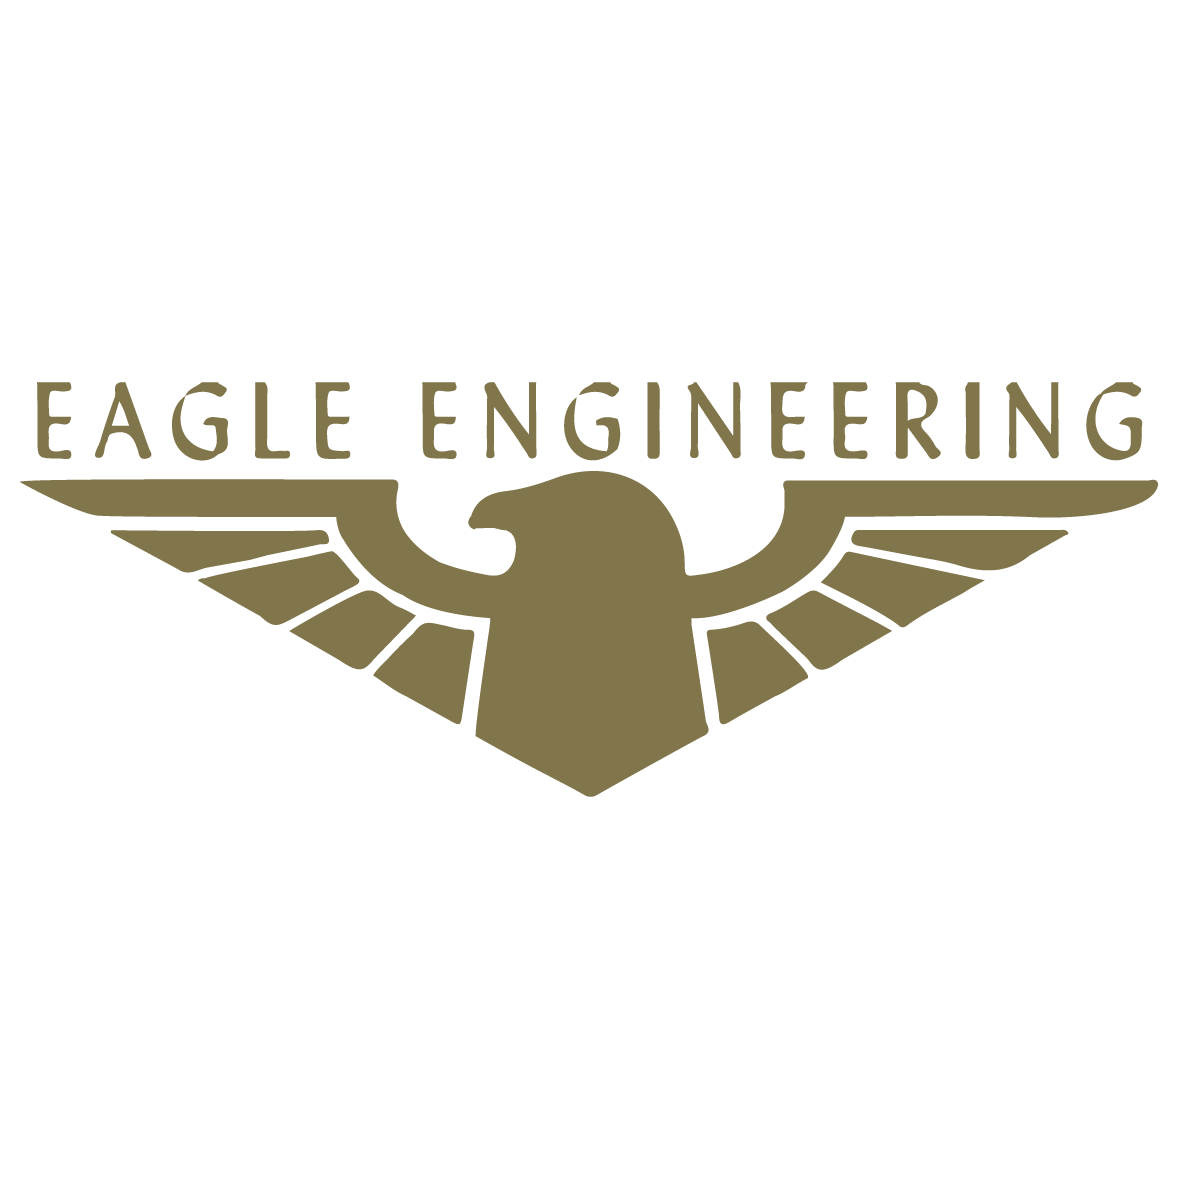 The Wandering Social Trusted By Eagle Engineering